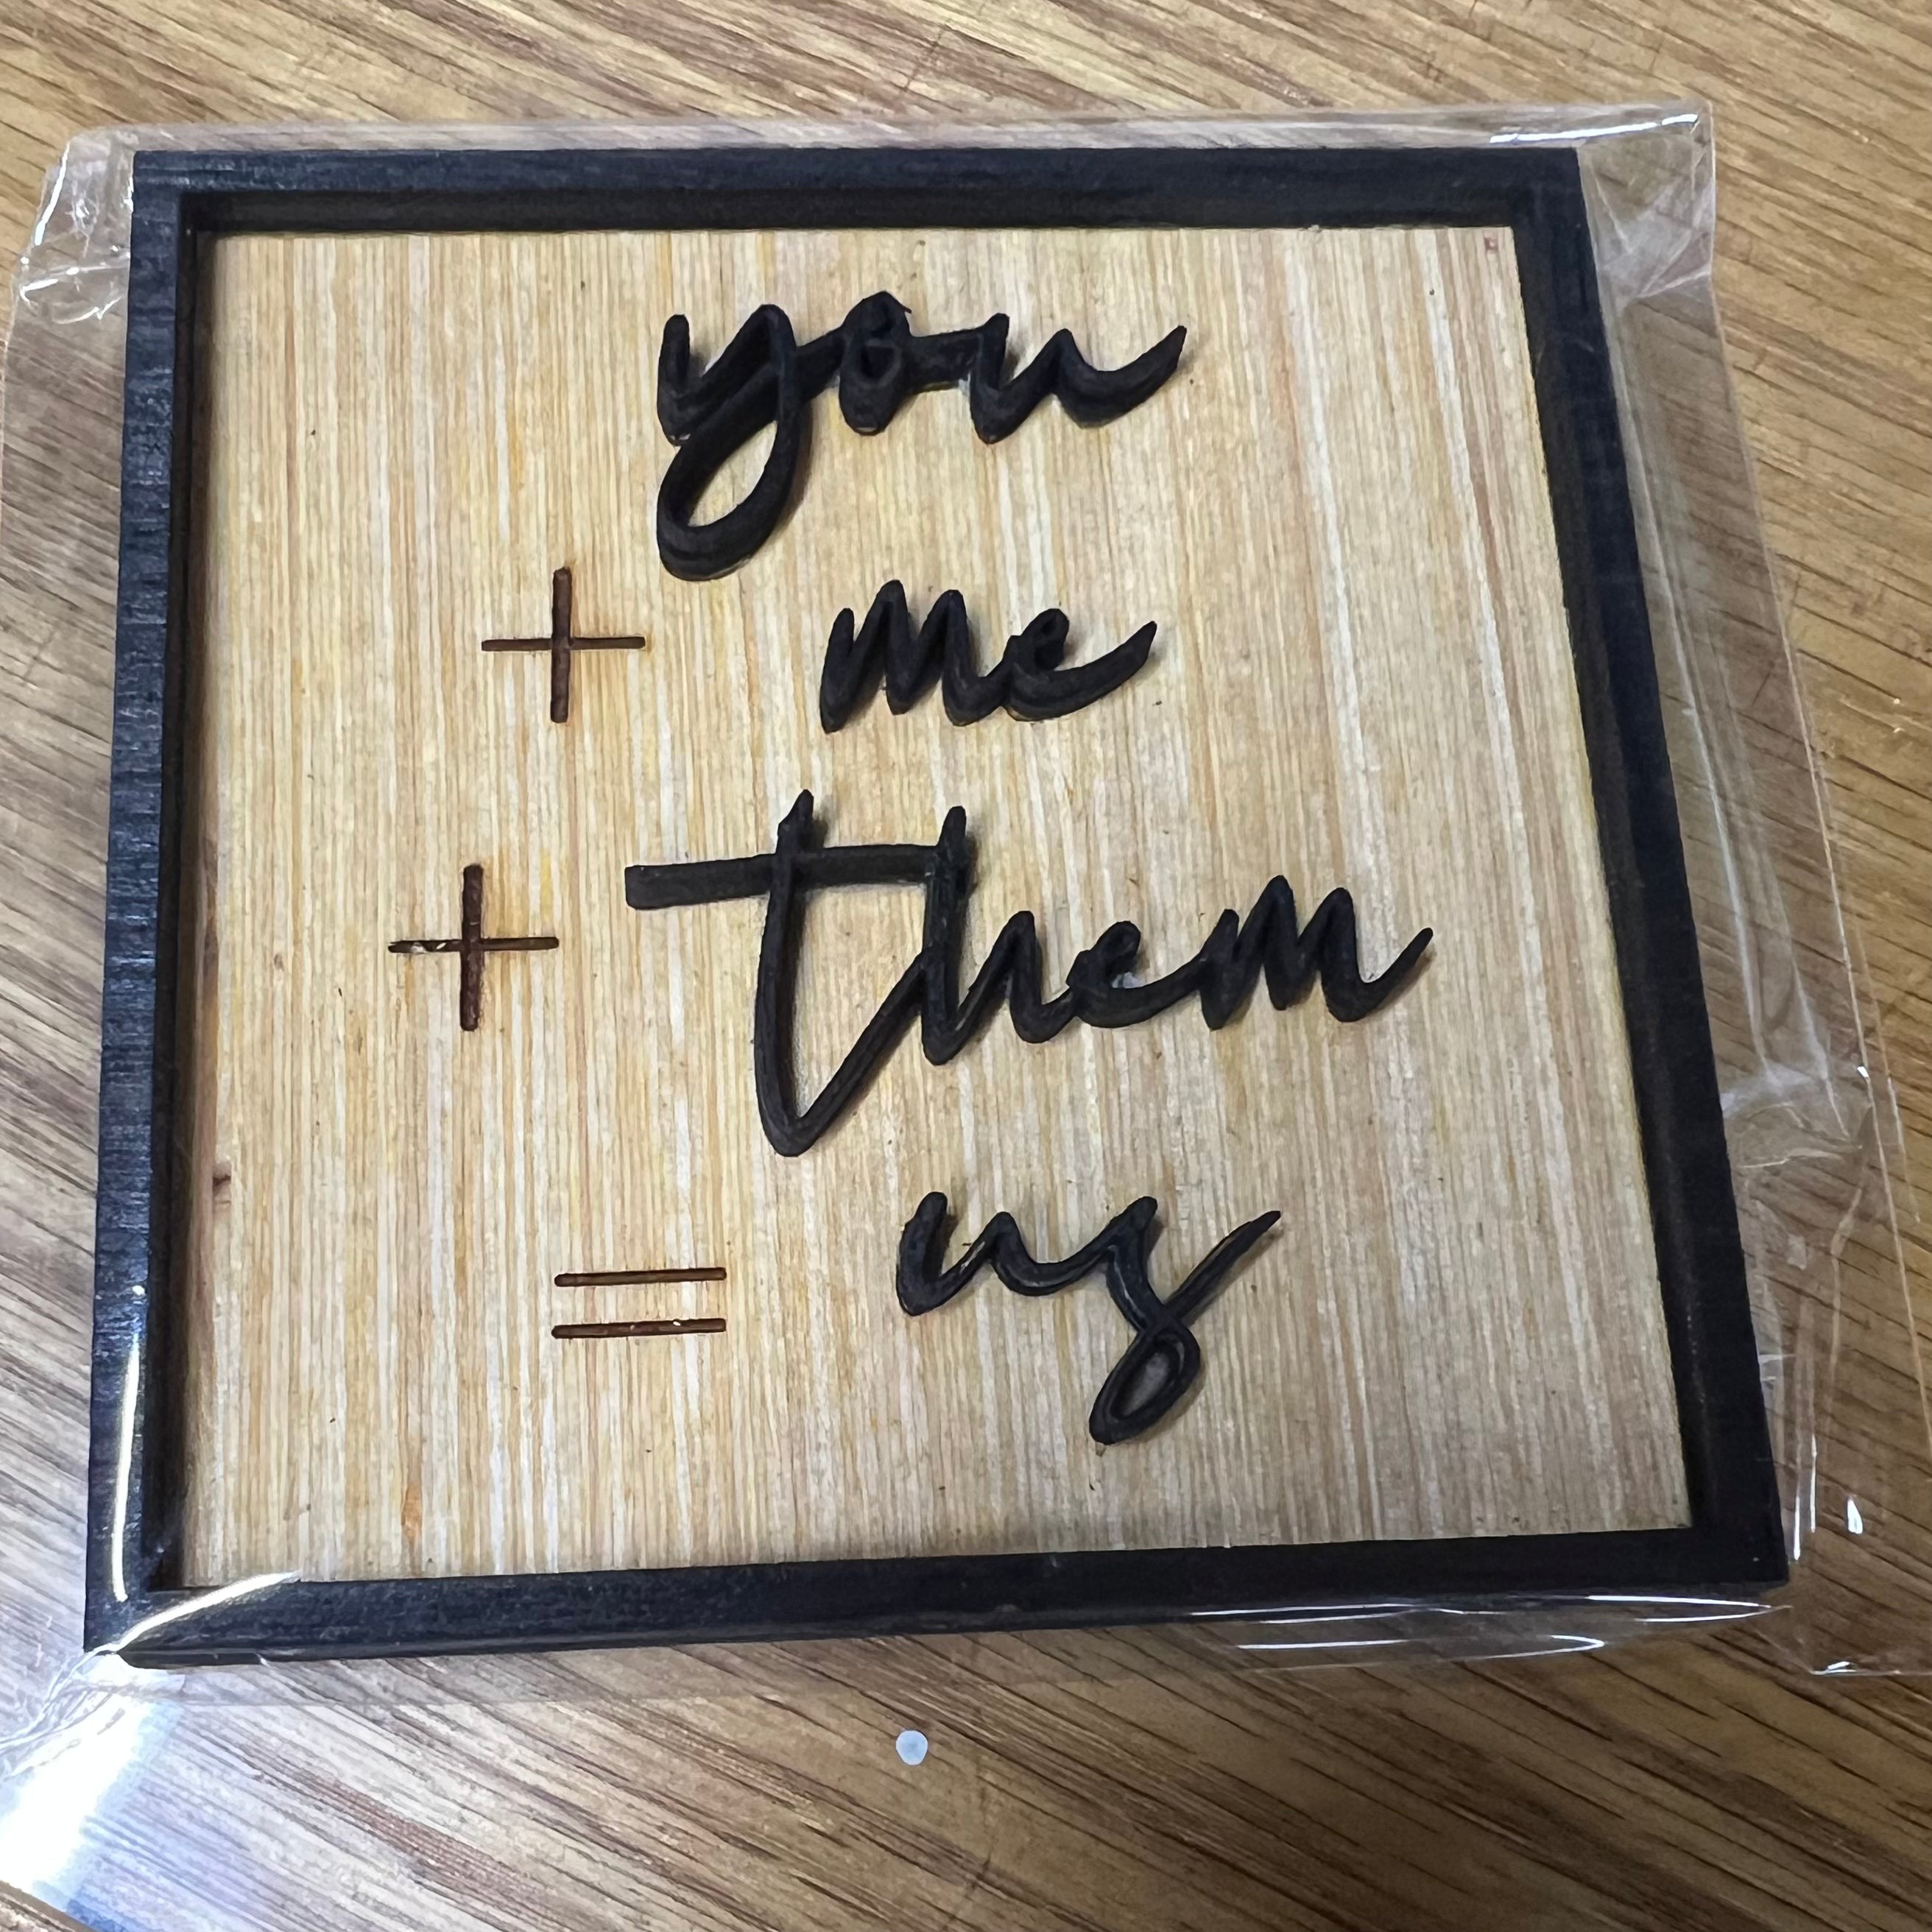 You + Me + Them = Us Square interchangeable insert